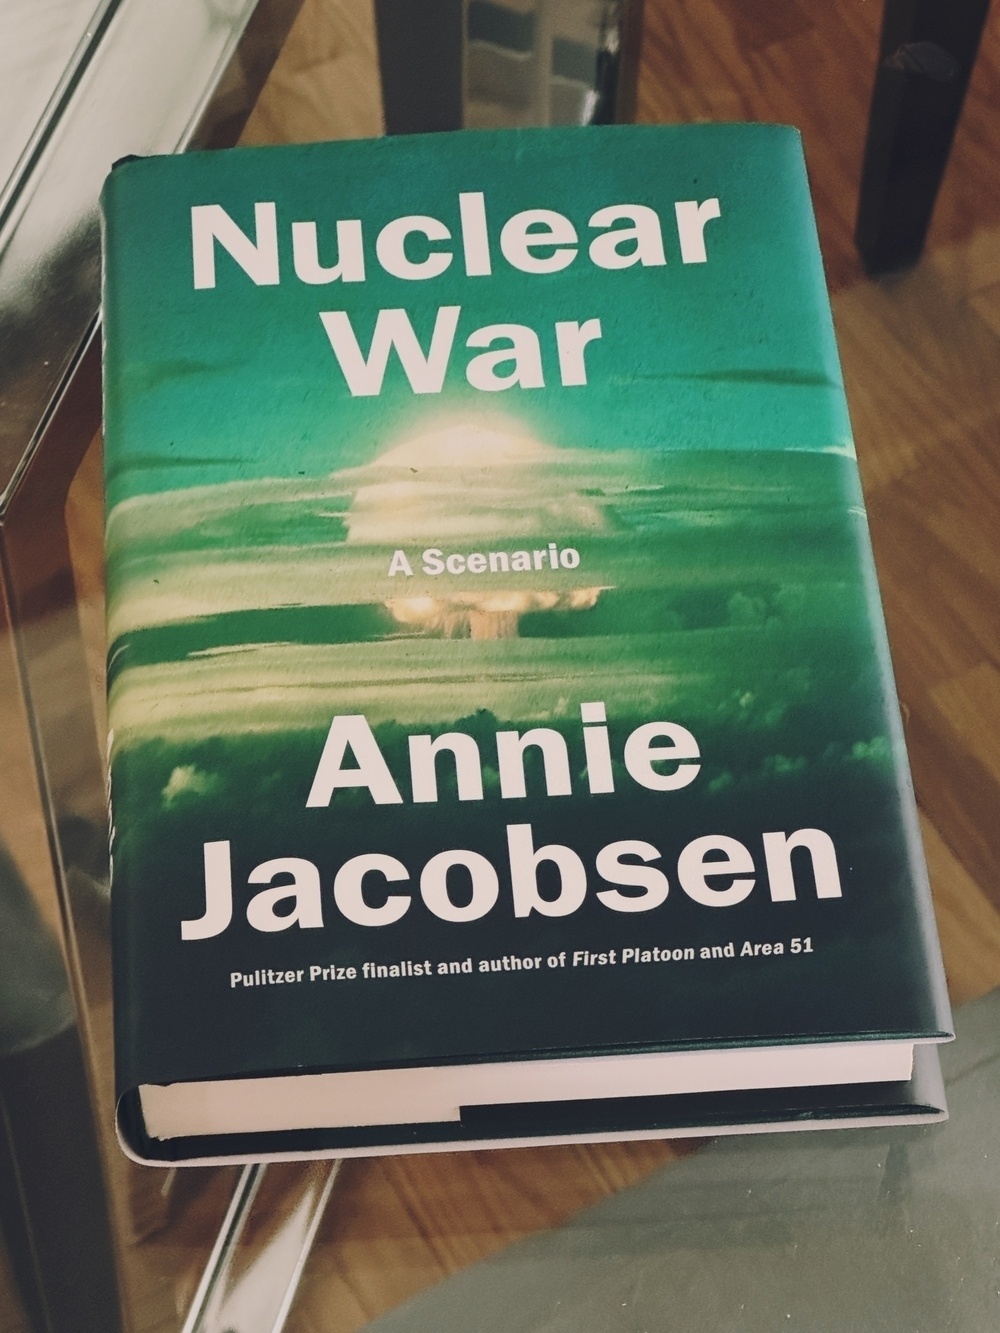 A greenish-black book cover with a nuclear explosion in the background on a glass table - the book is Nuclear War by Annie Jacobsen